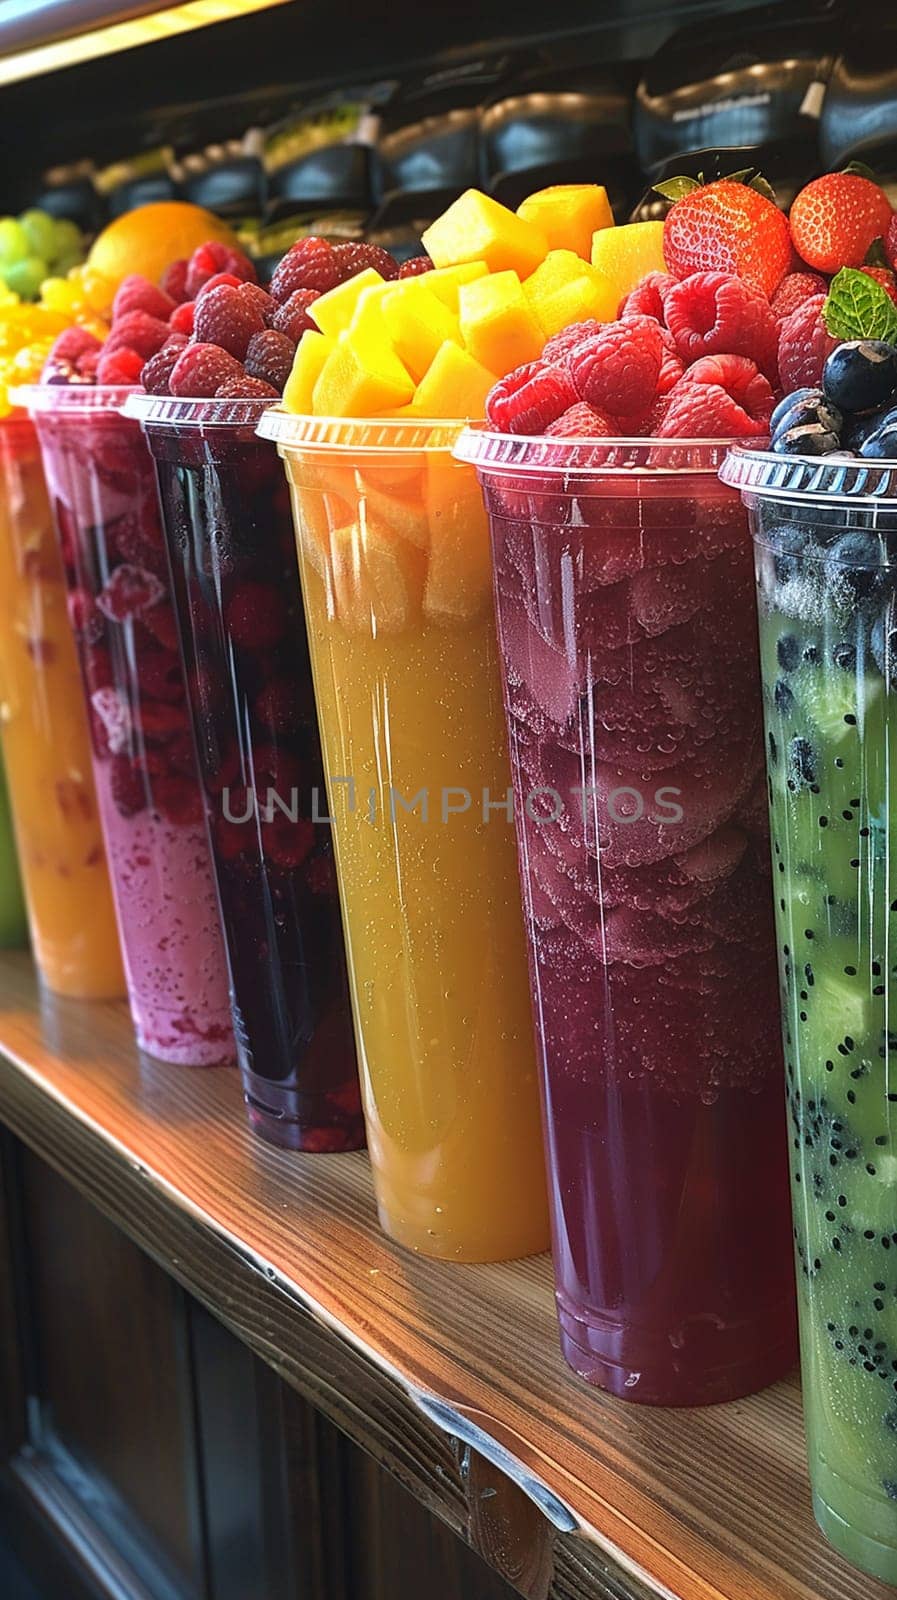 Vibrant Smoothie Kiosk Blends Health with Taste in Business of Refreshing Beverages by Benzoix